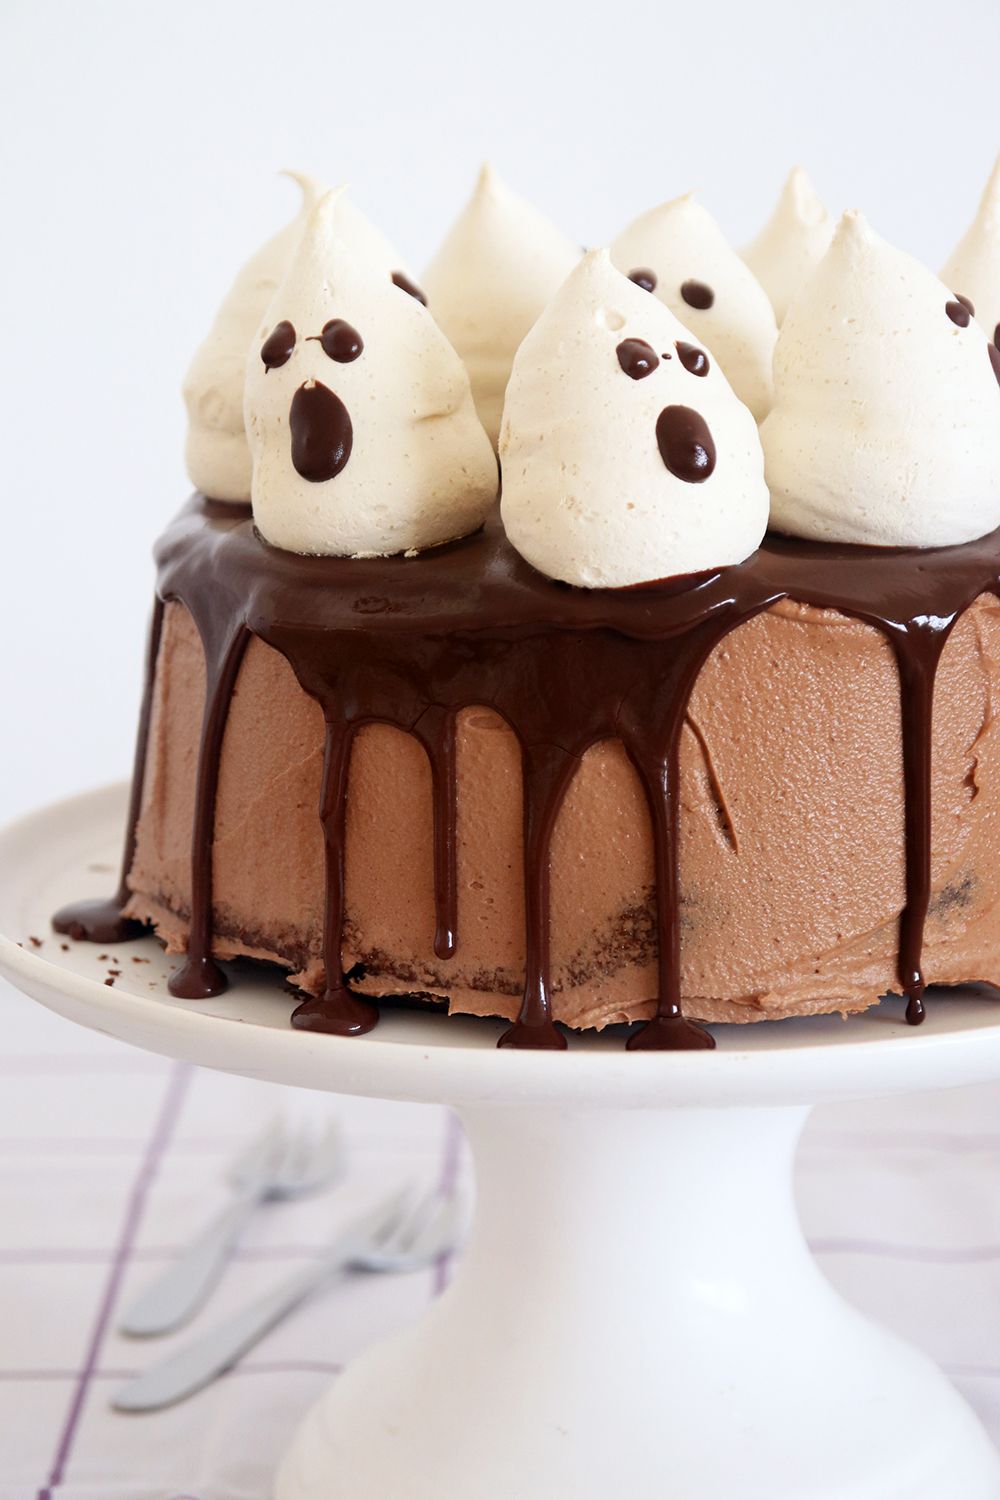 Sky-High Chocolate Cake with Meringue Ghosts | Photo: Natalie Levin